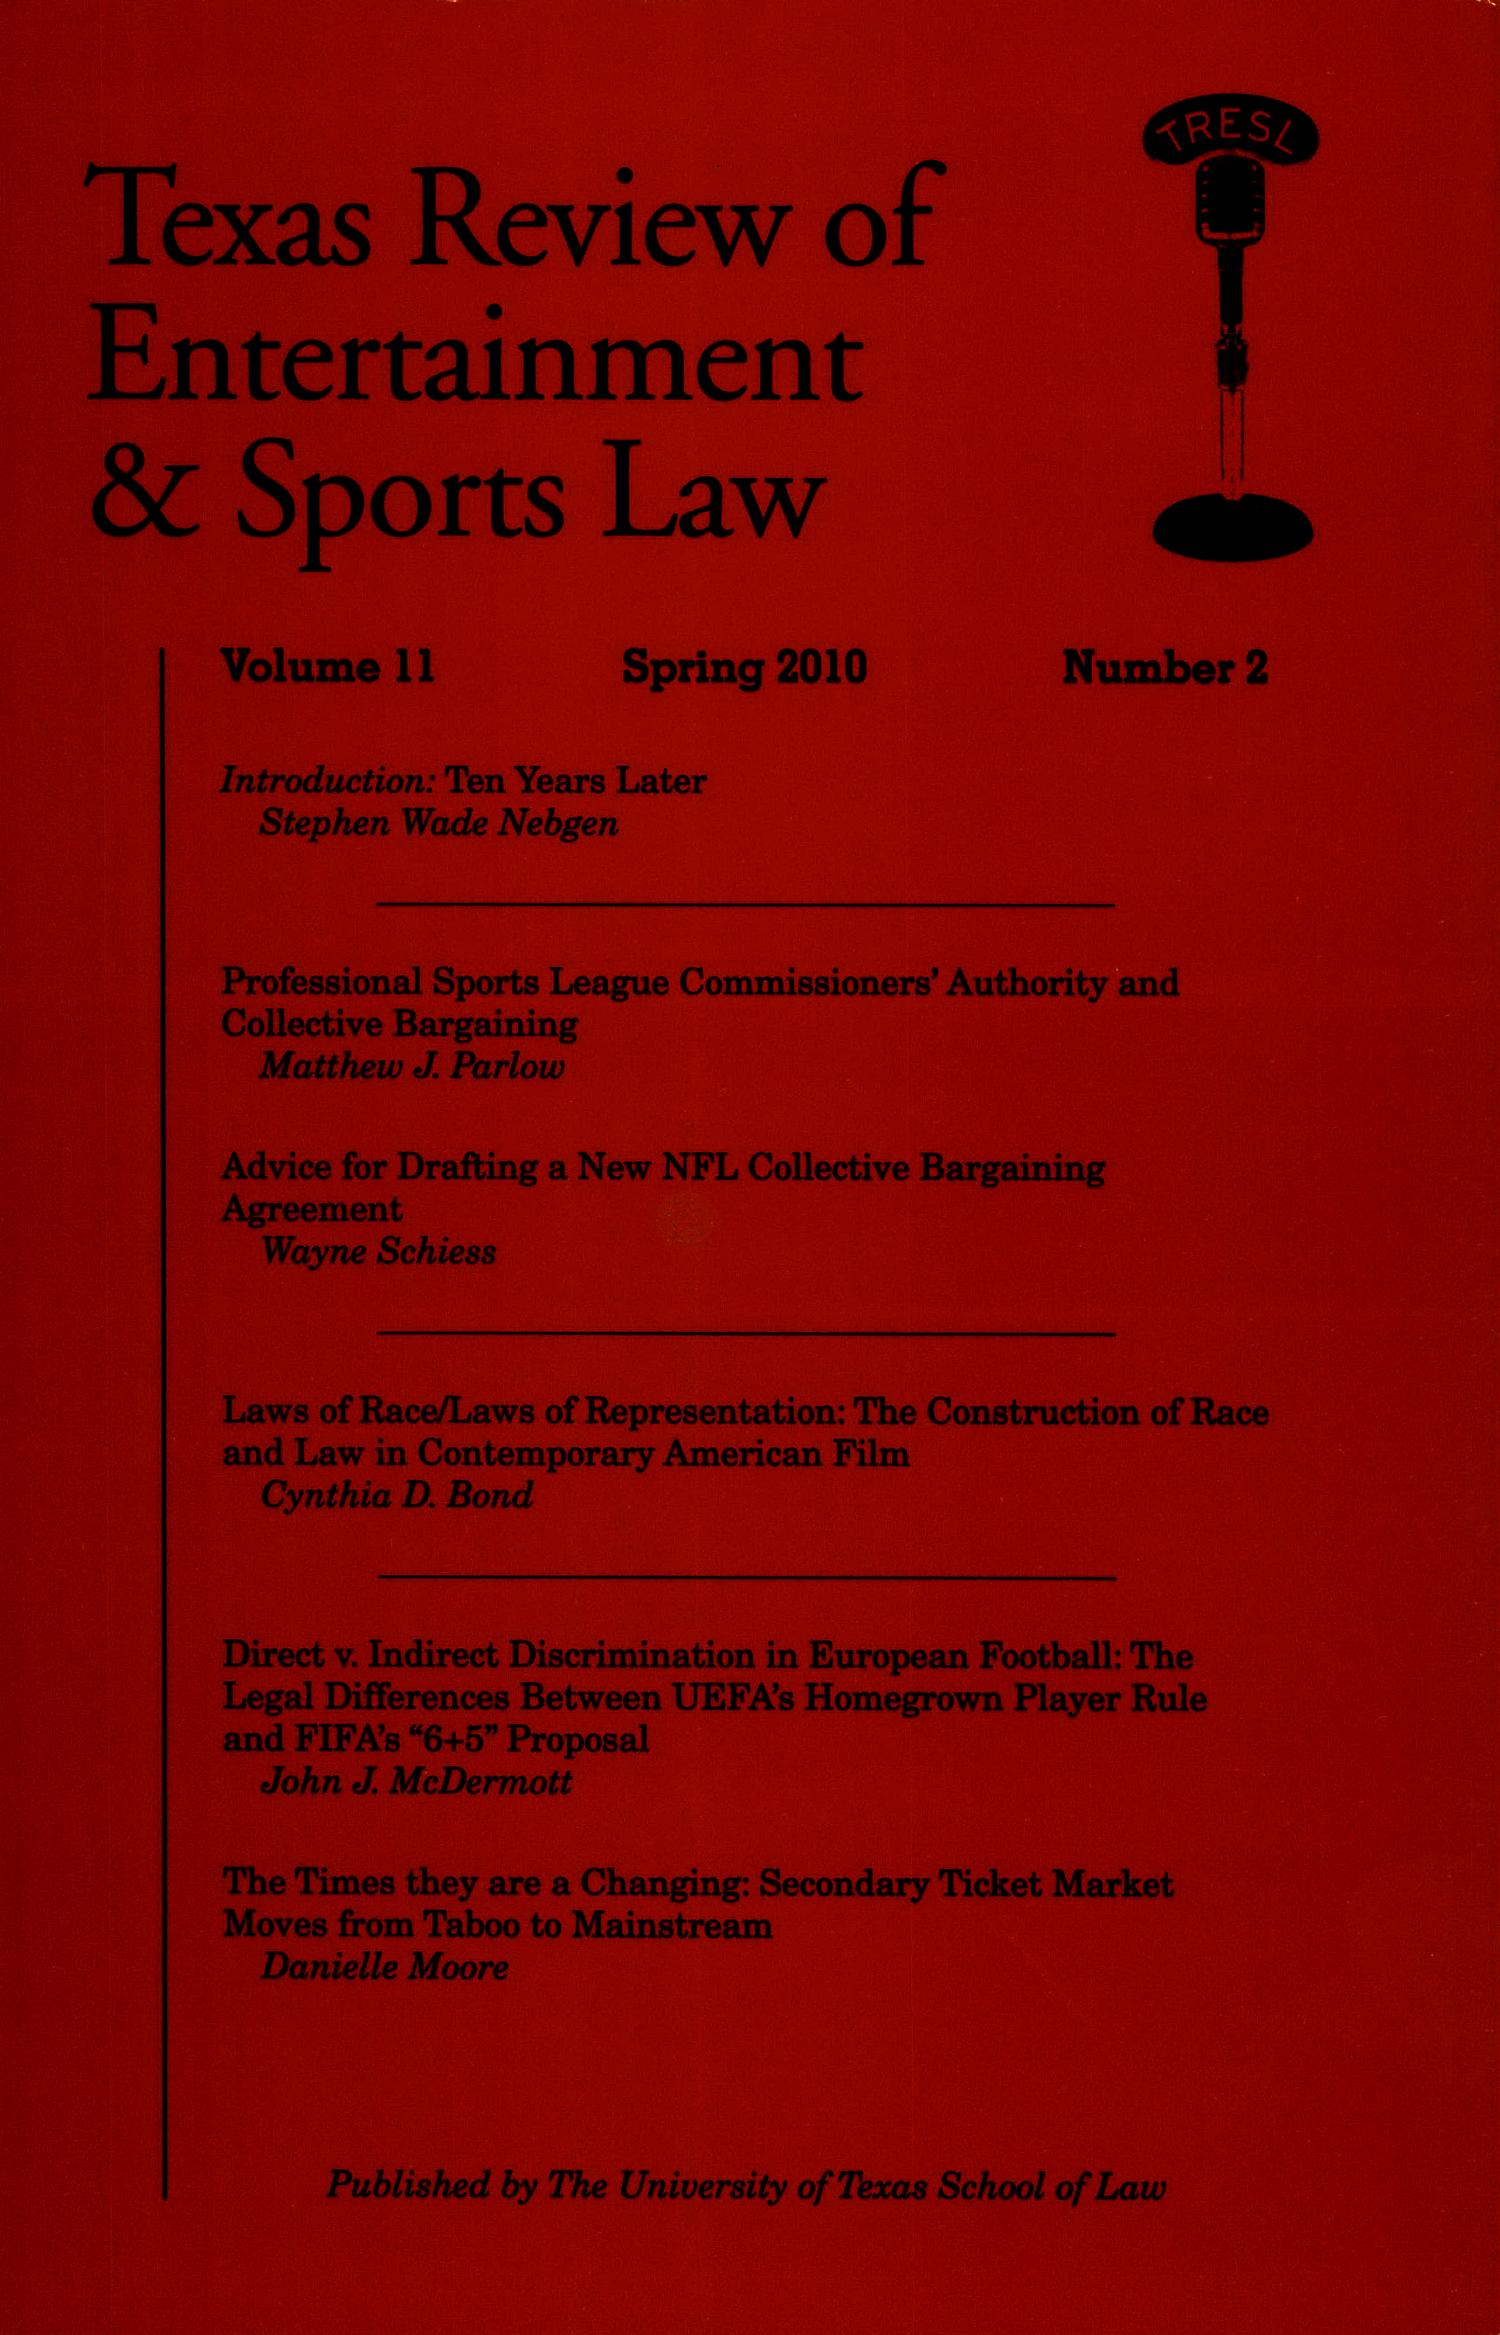 Texas Review of Entertainment & Sports Law, Volume 11, Number 2, Spring 2010
                                                
                                                    Front Cover
                                                